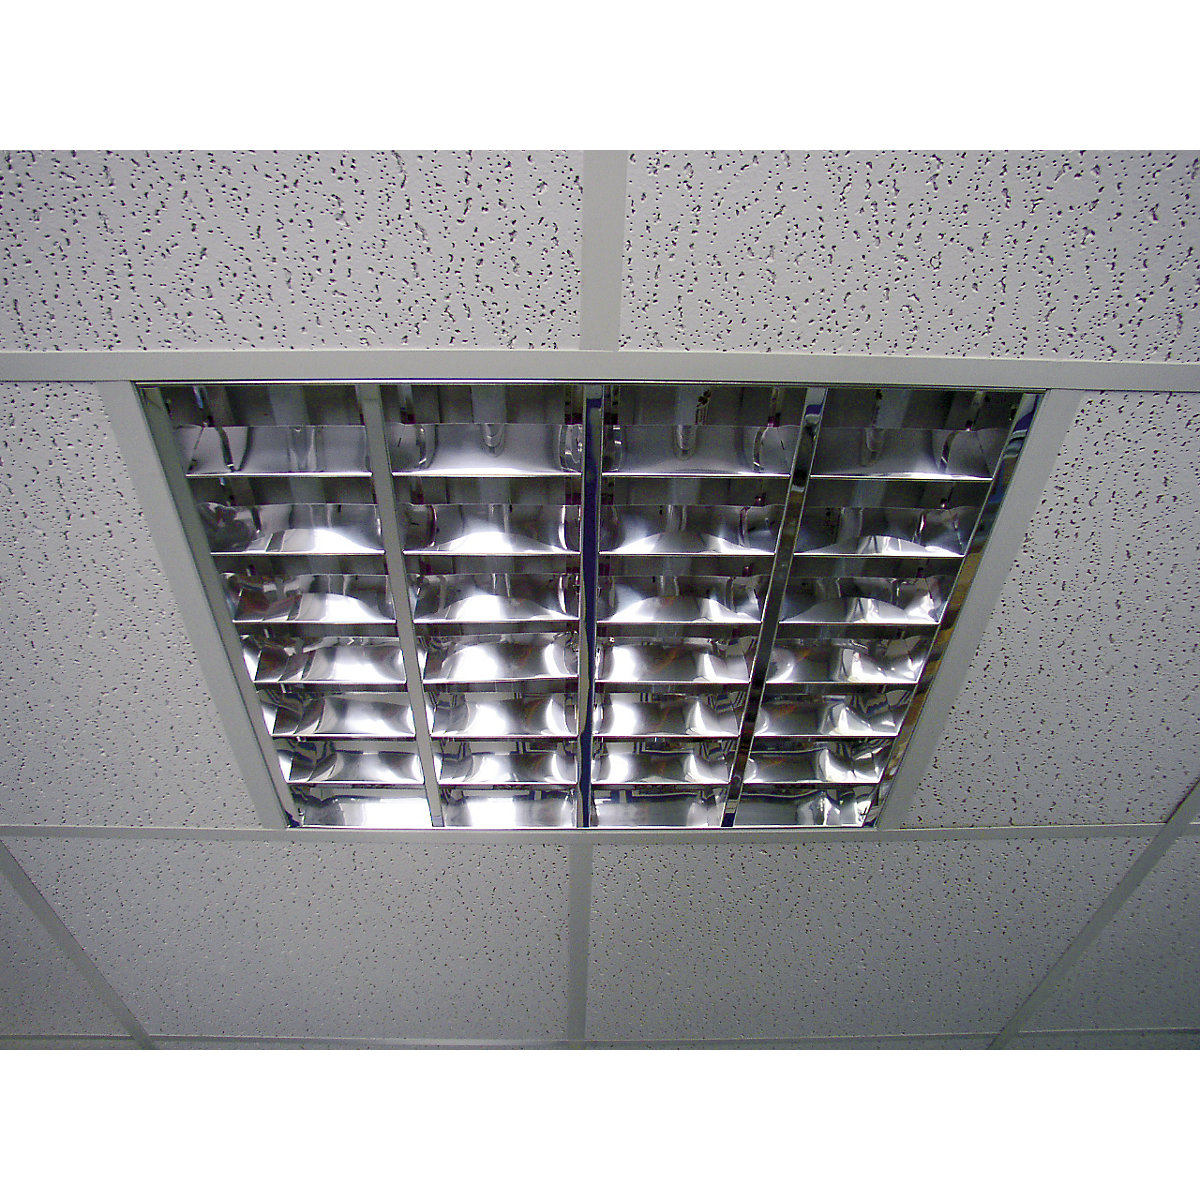 BAP fitted grid light